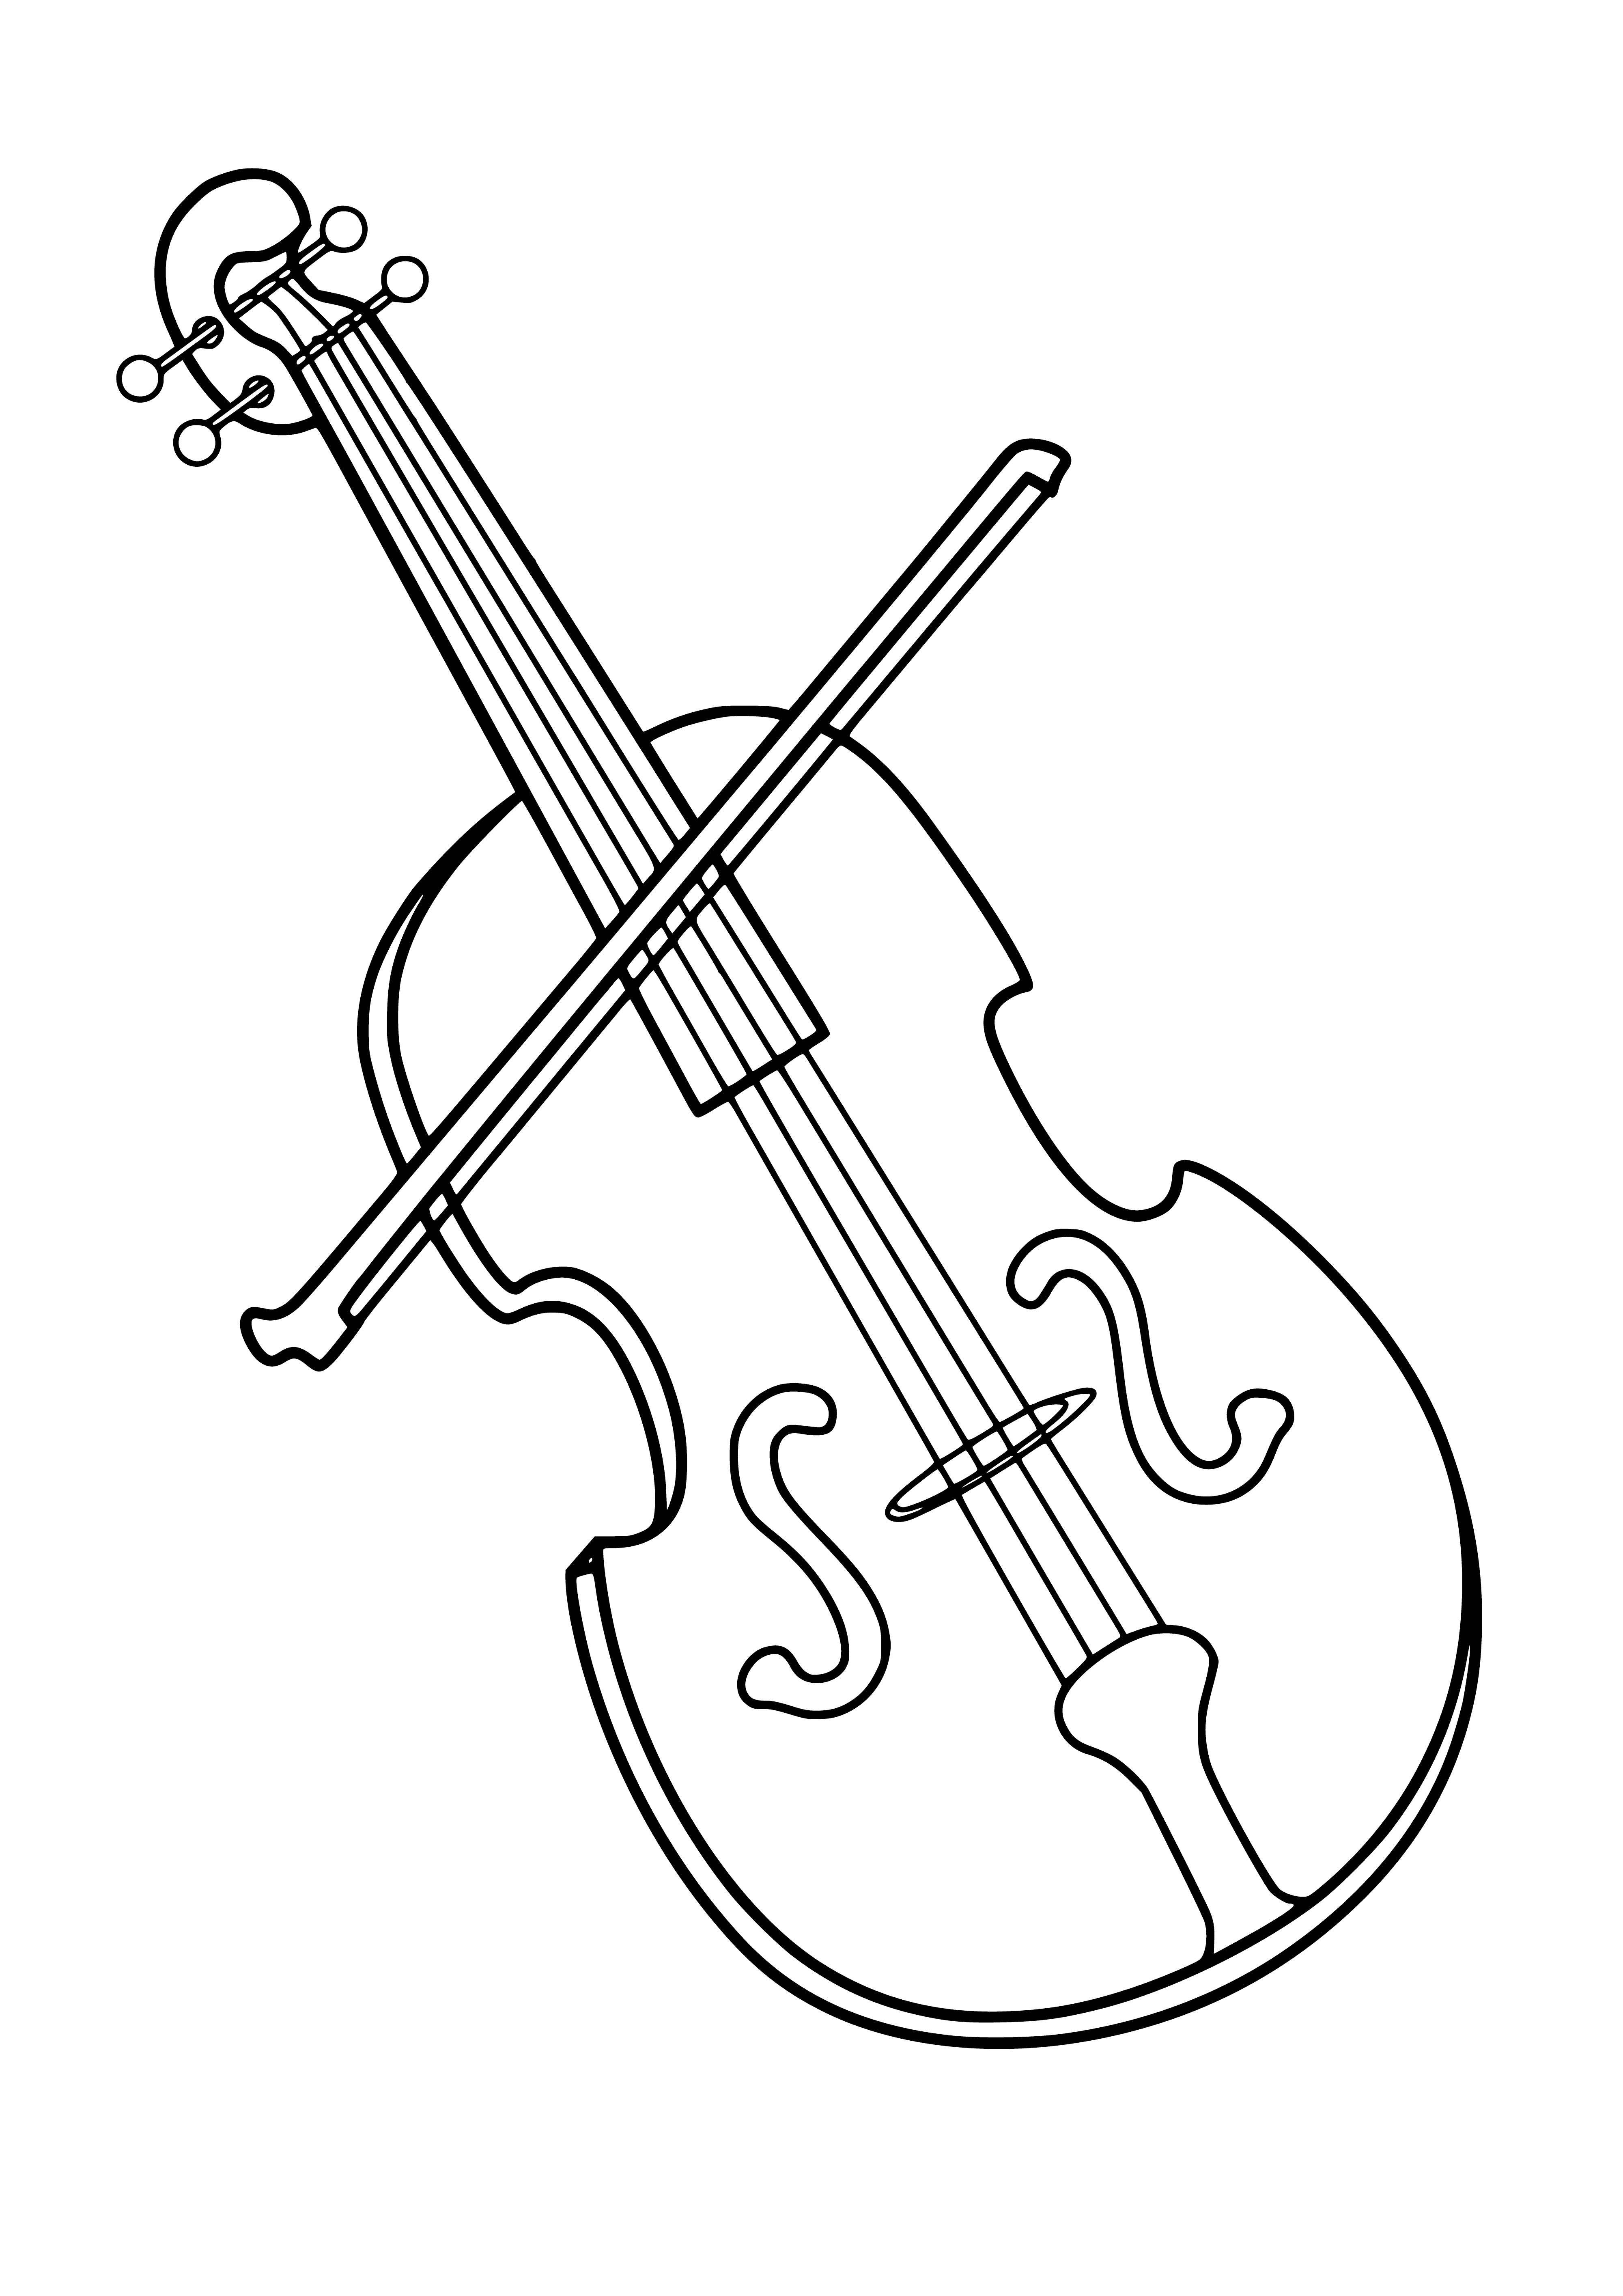 coloring page: Person plays violin, left hand holds instrument, right bows strings; plucks or bowing.